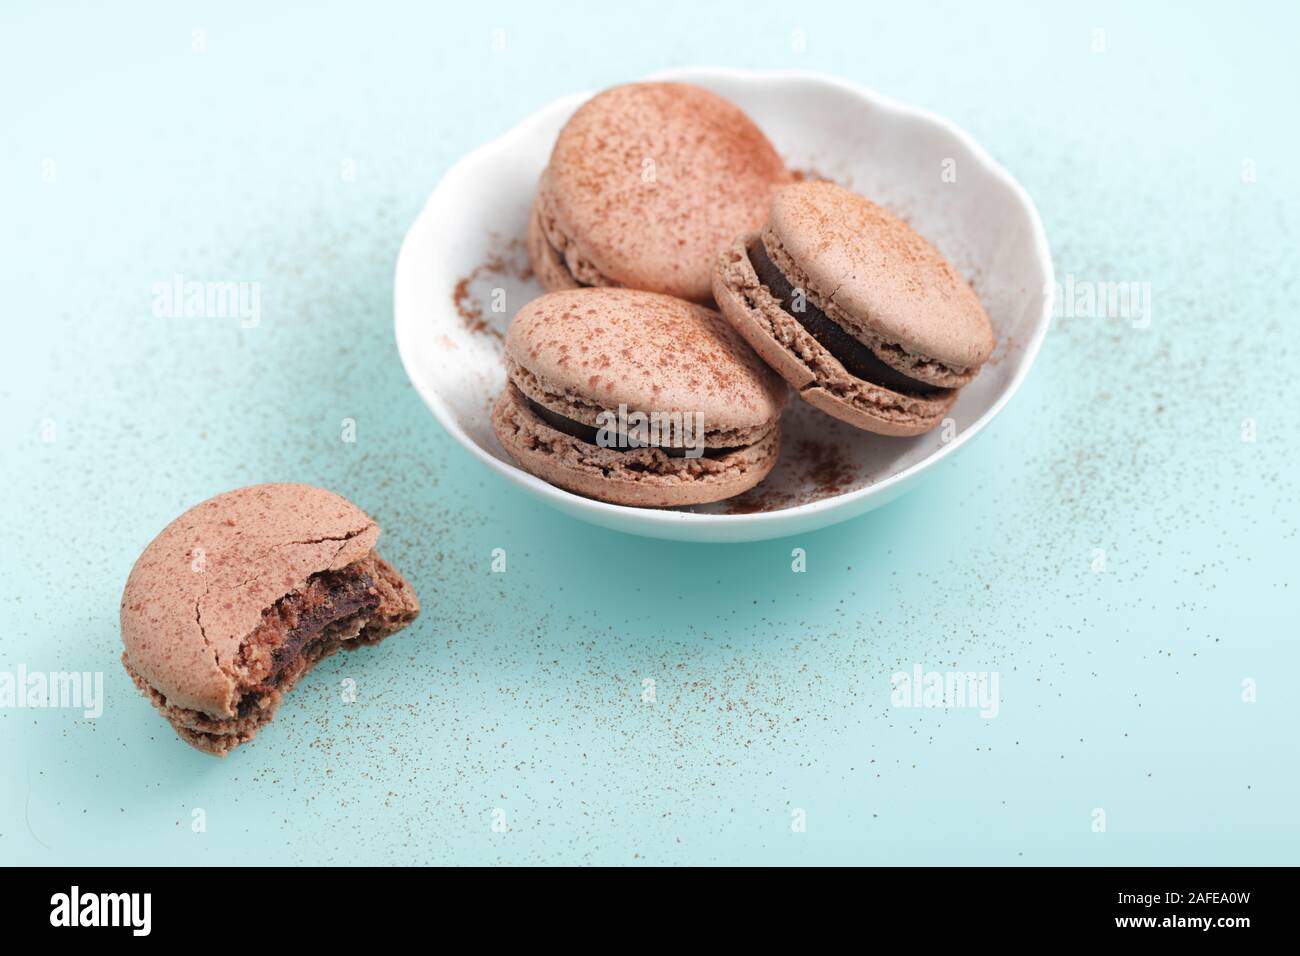 Chocolate macarons confections against cyan background Stock Photo